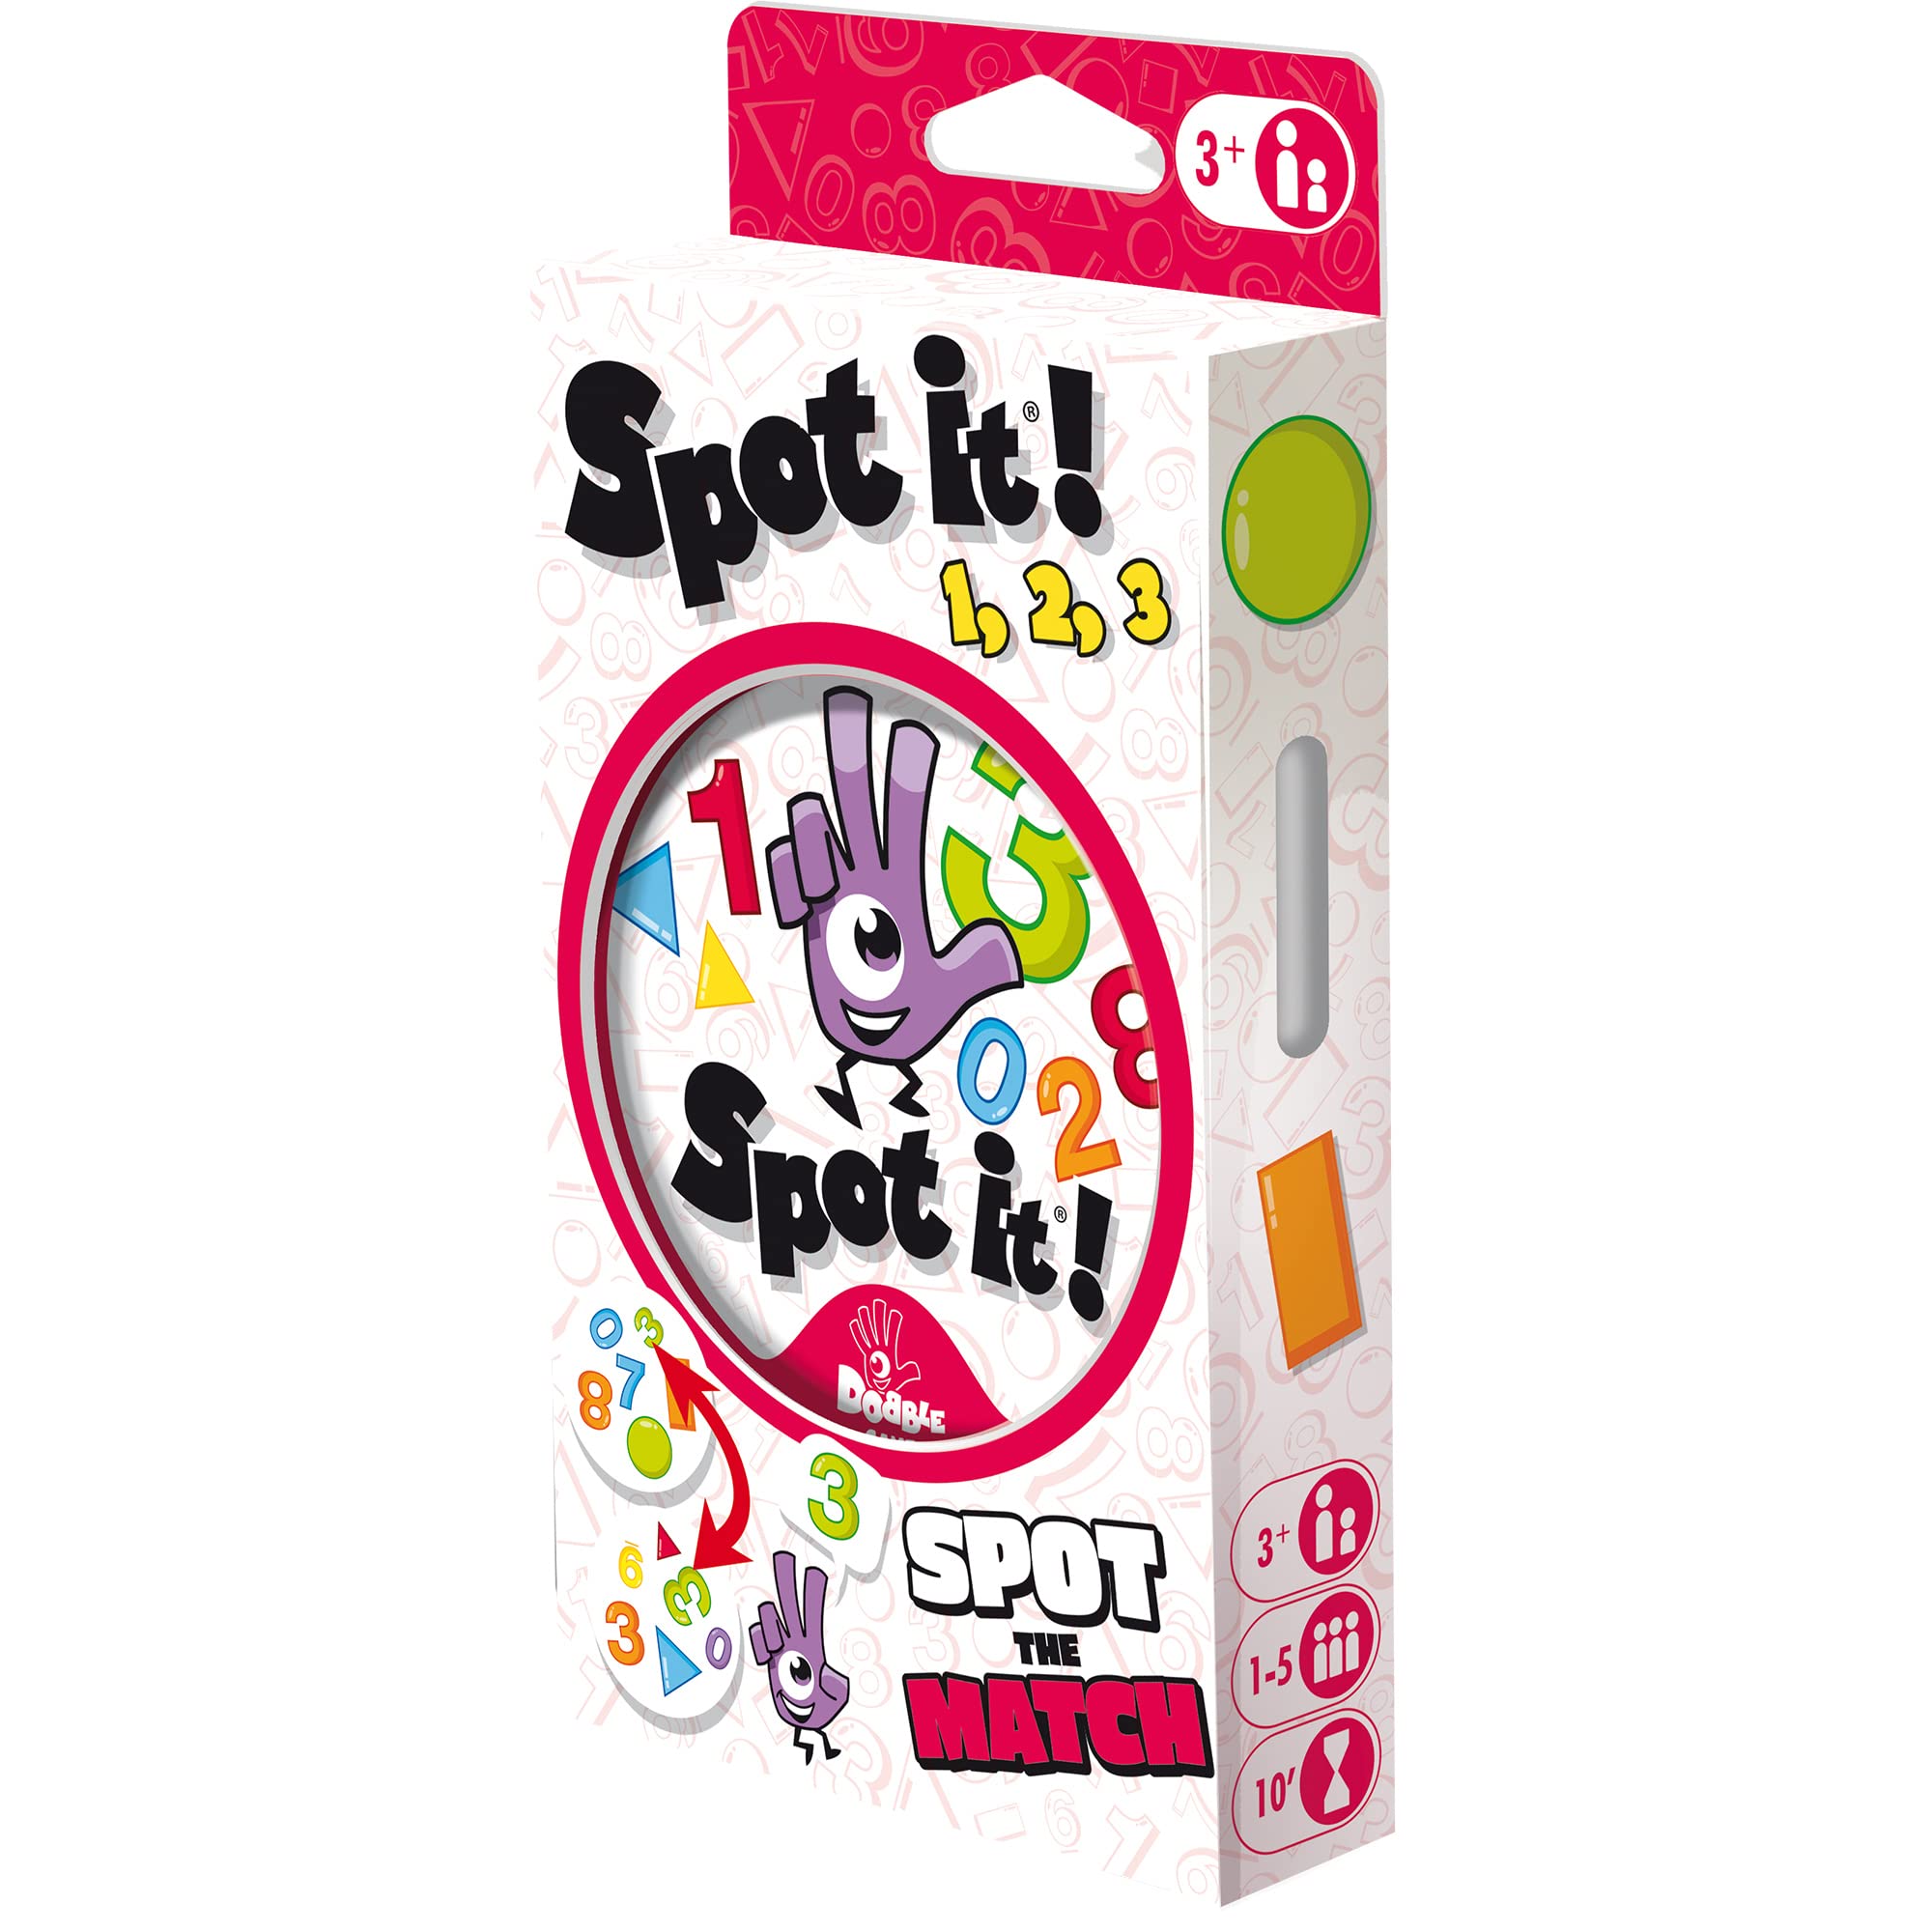 Spot It! 1,2,3 Card Game (Eco-Blister)| Matching Game | Fun Kids Game for Family Game Night | Travel Game for Kids | Great Kids Gift | Ages 3+ | 1-5 Players | Avg. Playtime 10 Mins | Made by Zygomatic